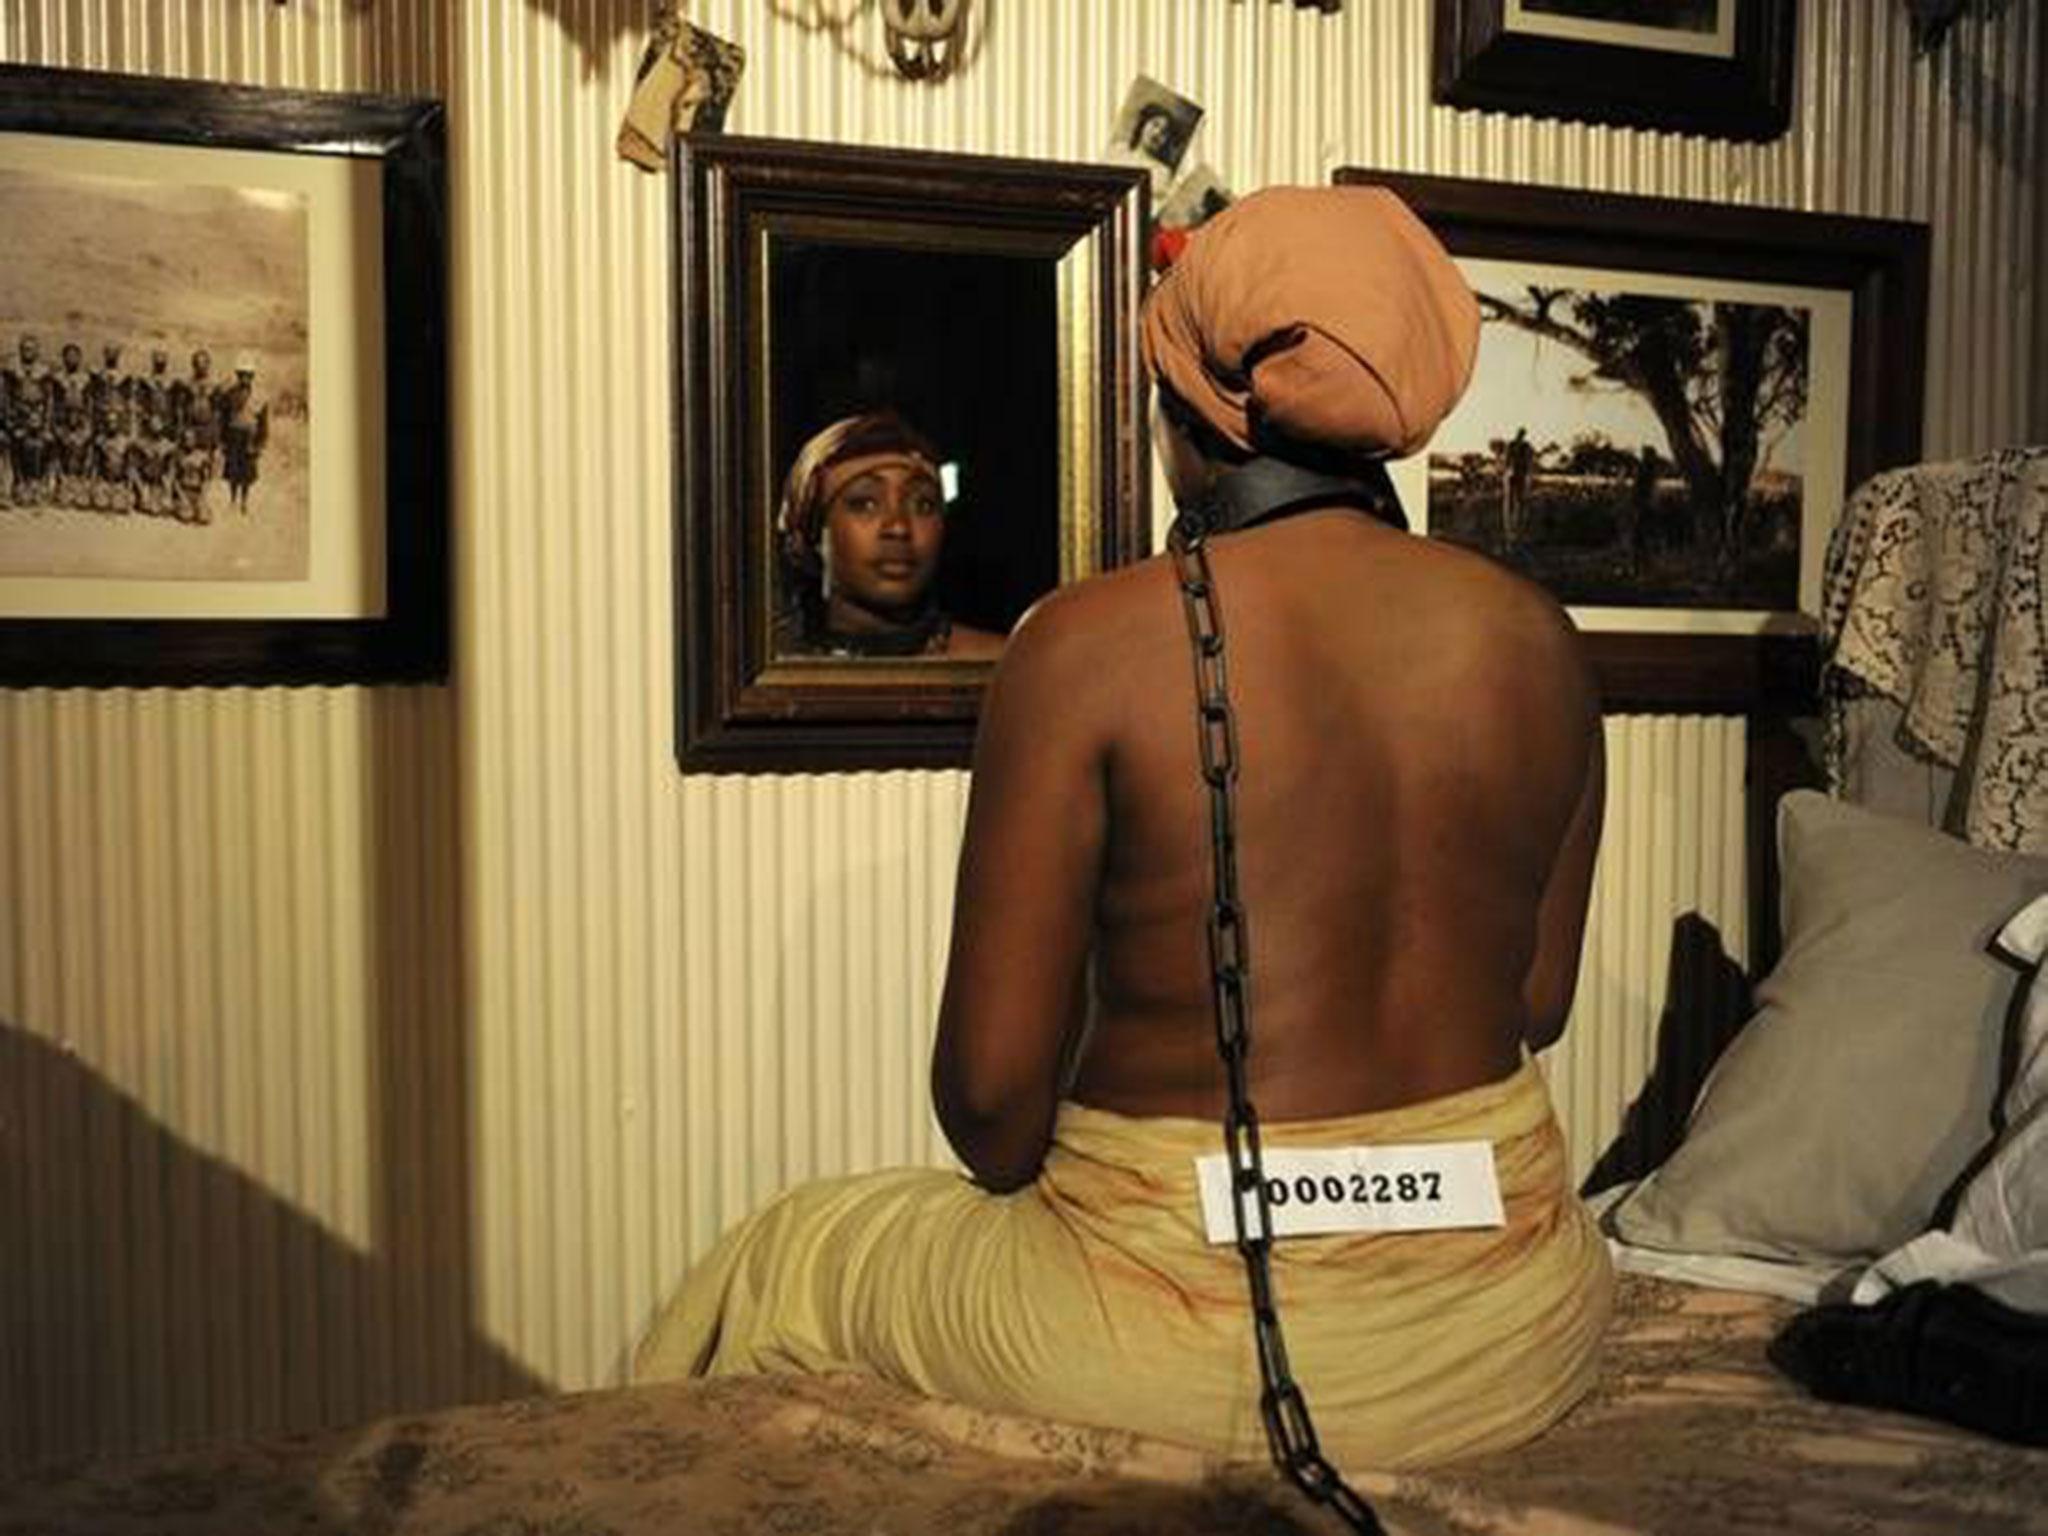 The Exhibit B theatrical installation was due to feature recreations of the human zoos of the 19th century where African tribesmen and women were displayed for European and American audiences